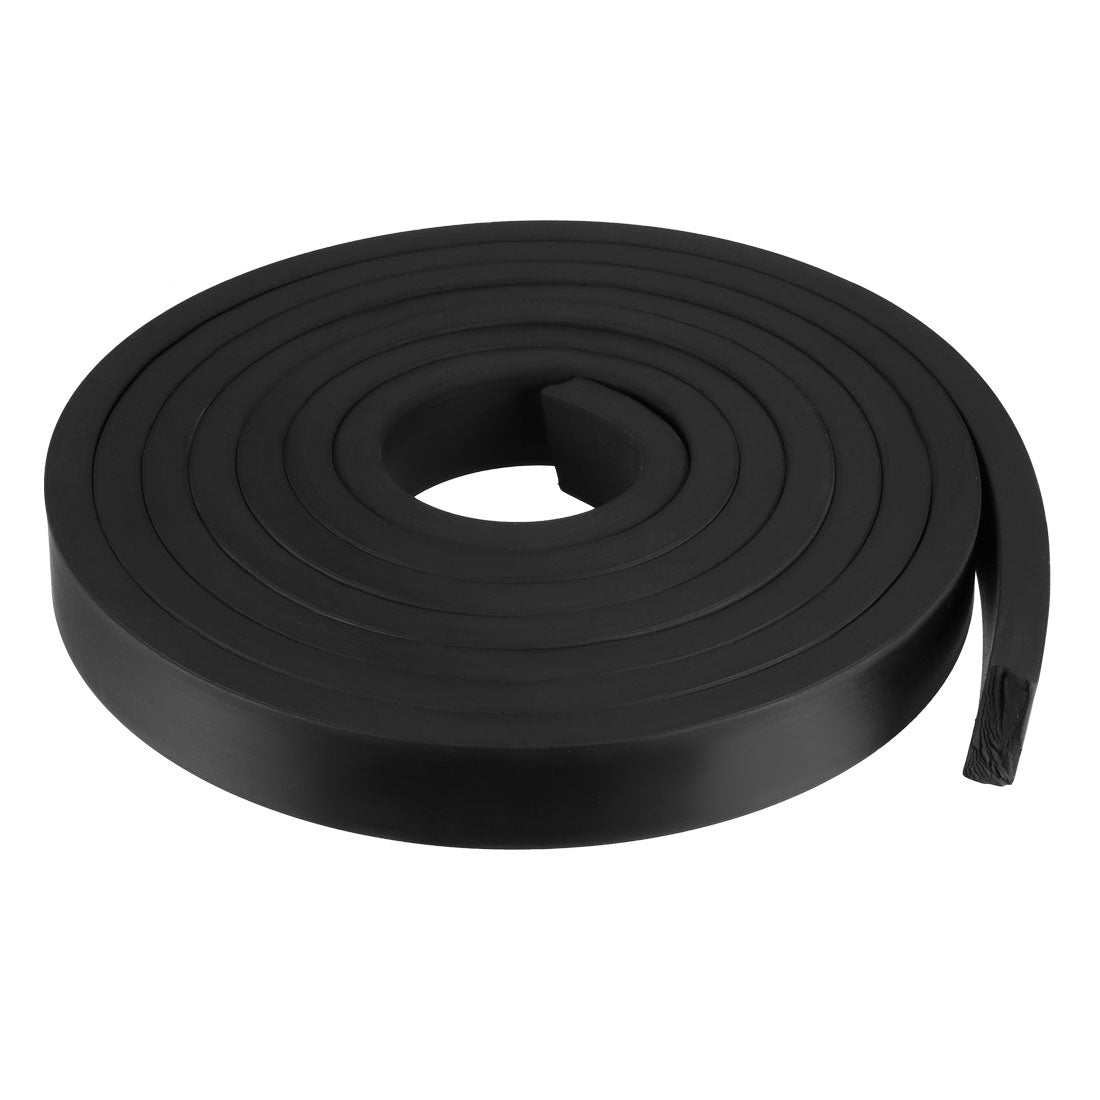 uxcell Uxcell Solid Rectangle Rubber Seal Strip 25mm Wide 10mm Thick, 3 Meters Long Black